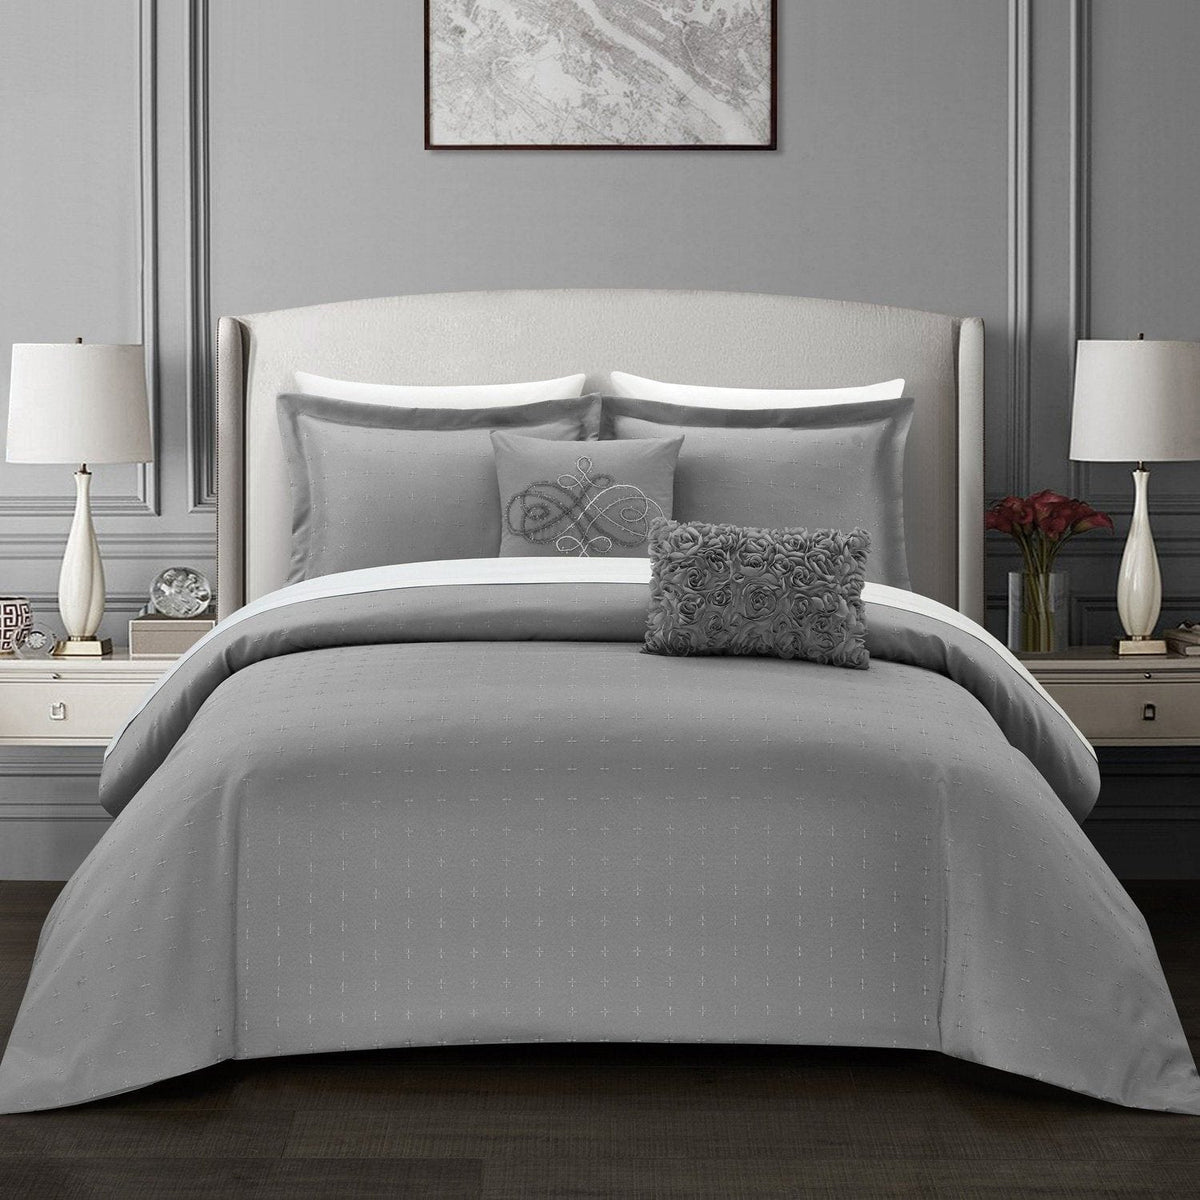 Chic Home Emery 5 Piece Stitched Comforter Set Grey